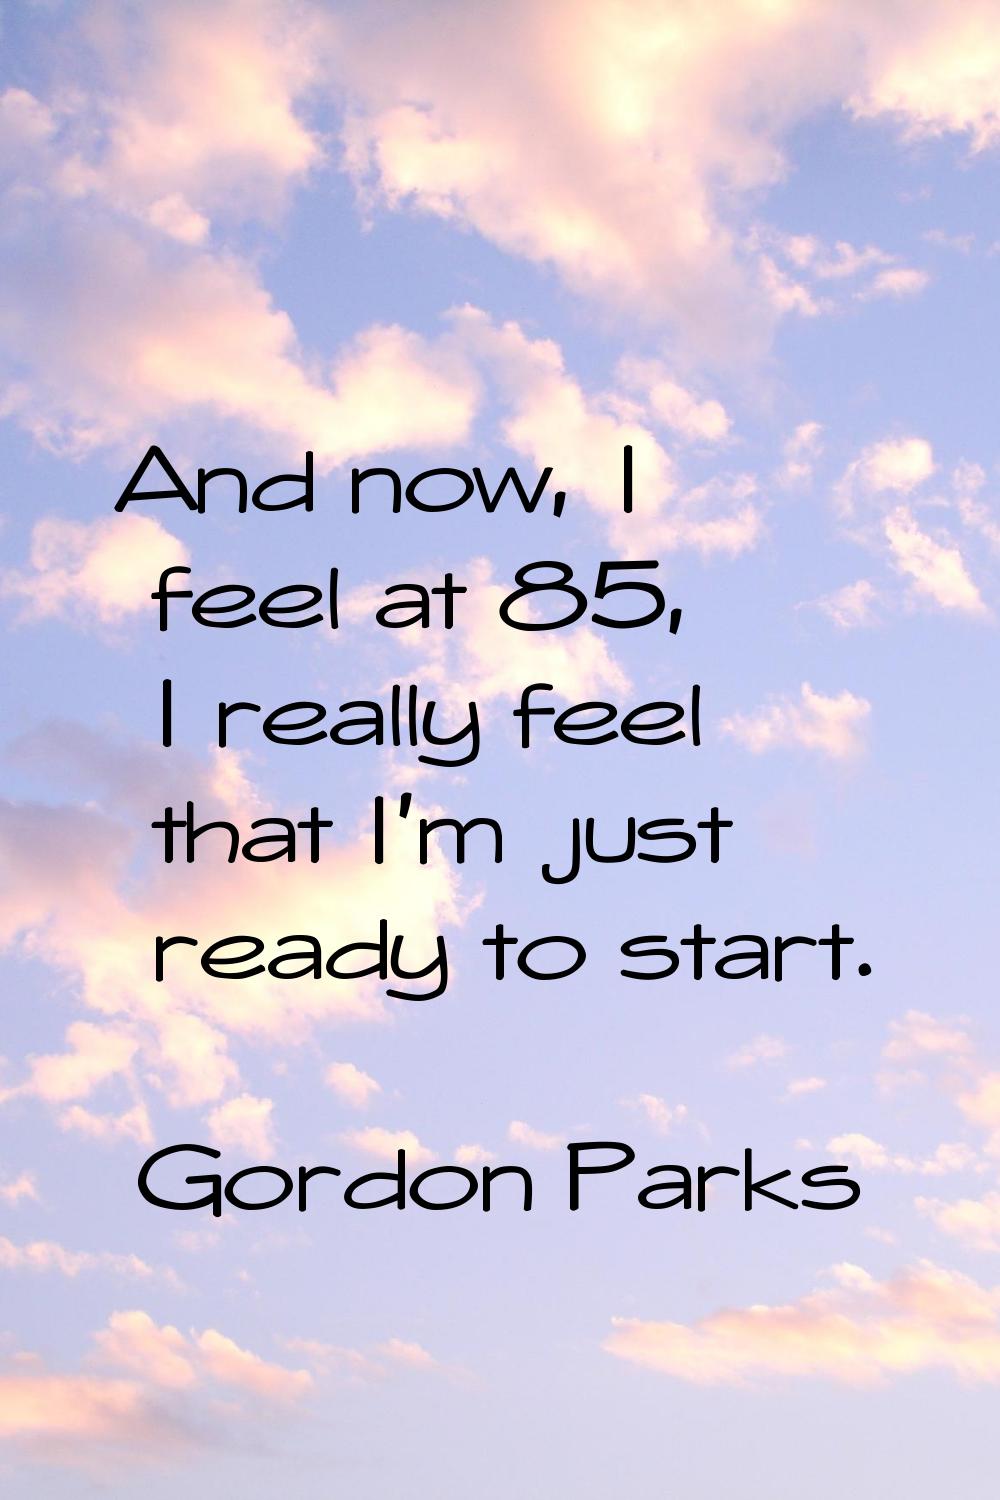 And now, I feel at 85, I really feel that I'm just ready to start.